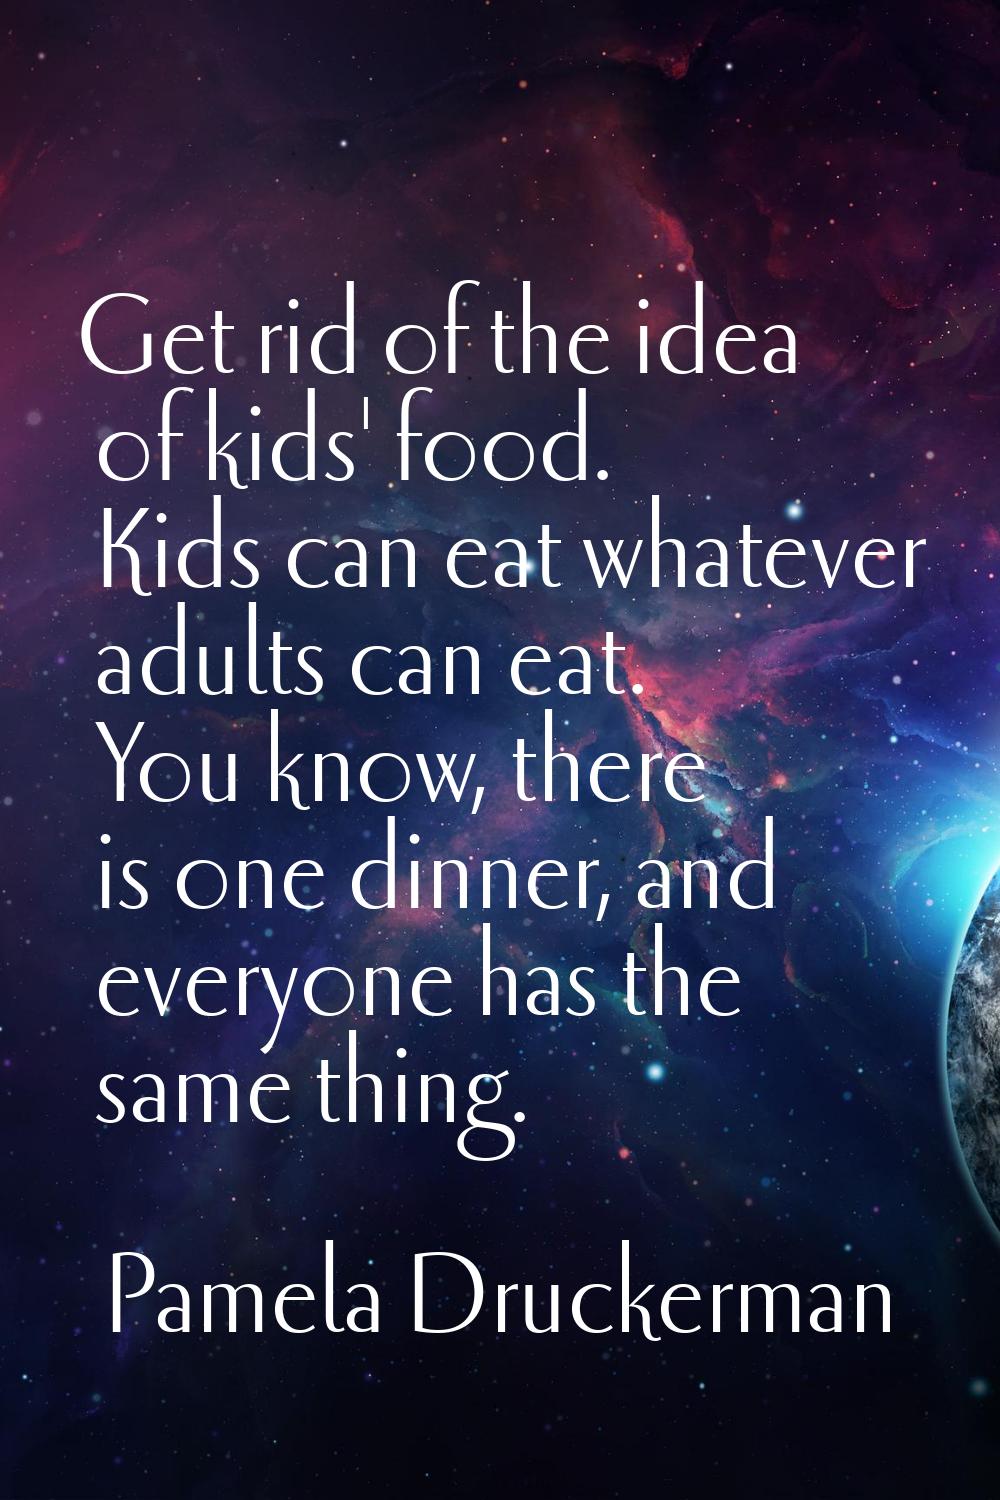 Get rid of the idea of kids' food. Kids can eat whatever adults can eat. You know, there is one din